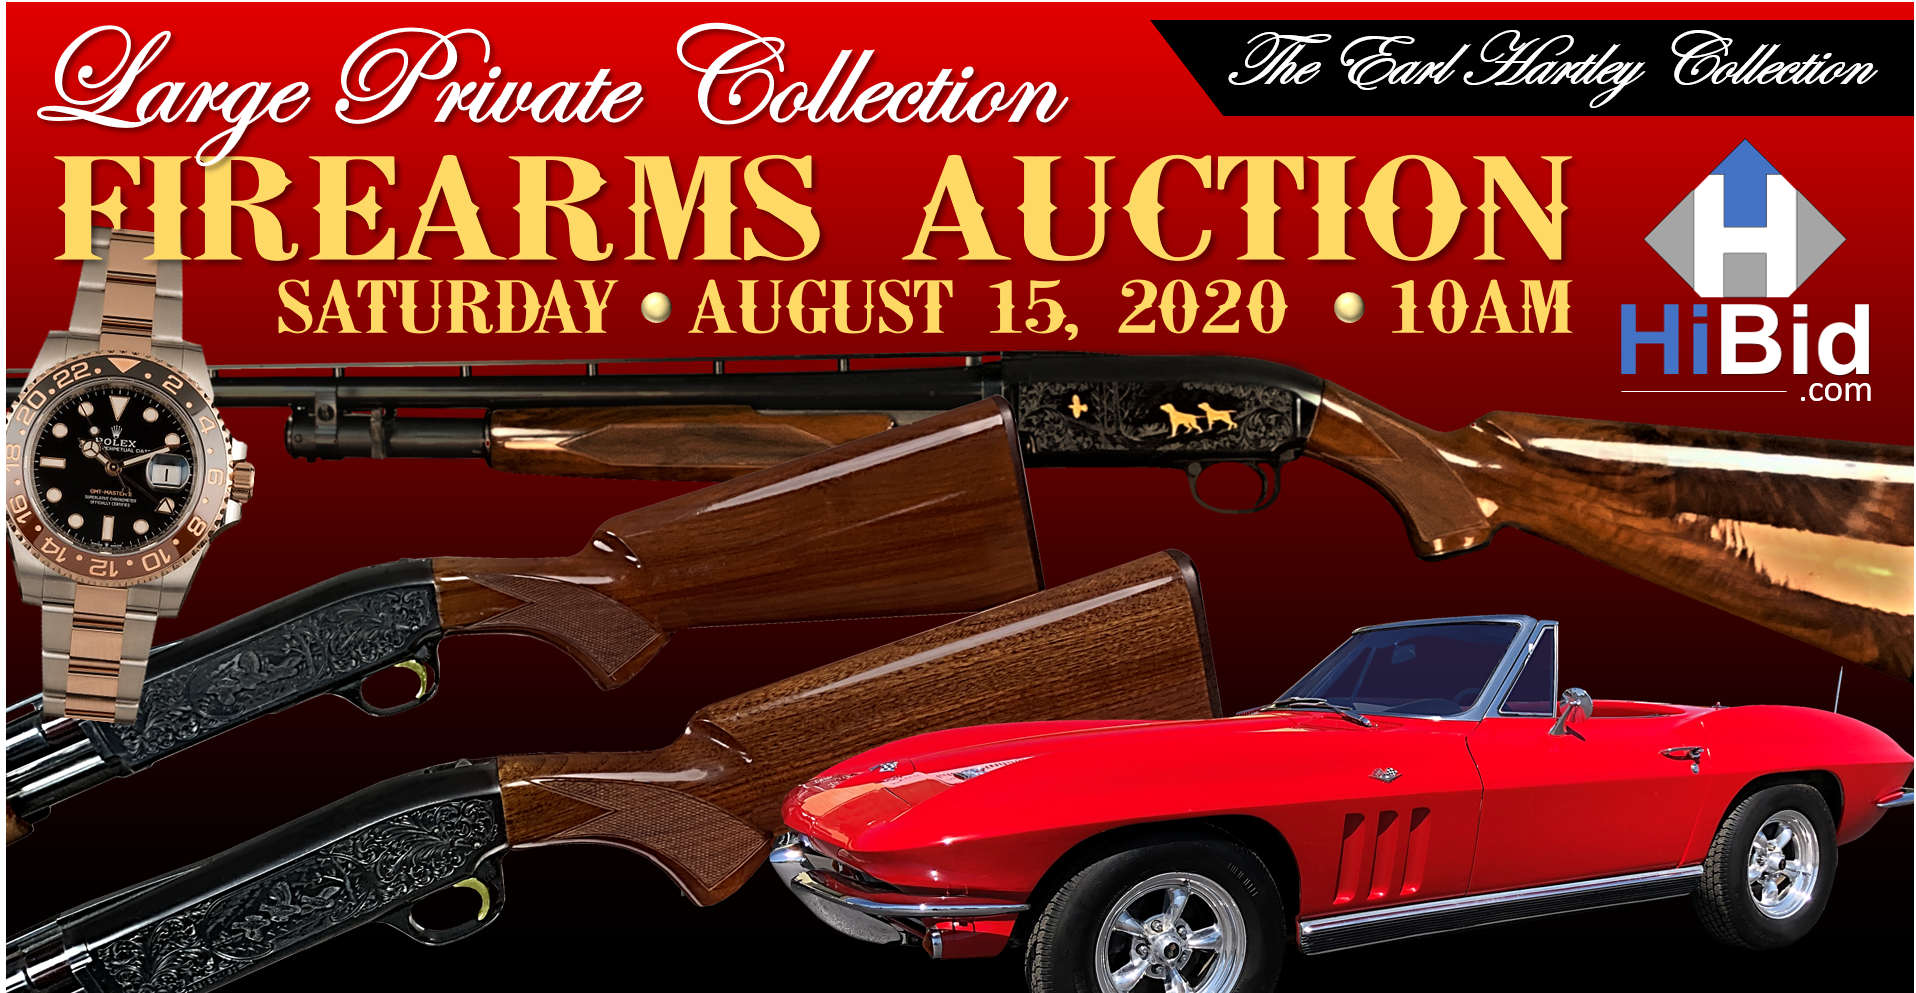 LARGE PRIVATE COLLECTION FIREARMS AUCTION – THE HARTLEY COLLECTION